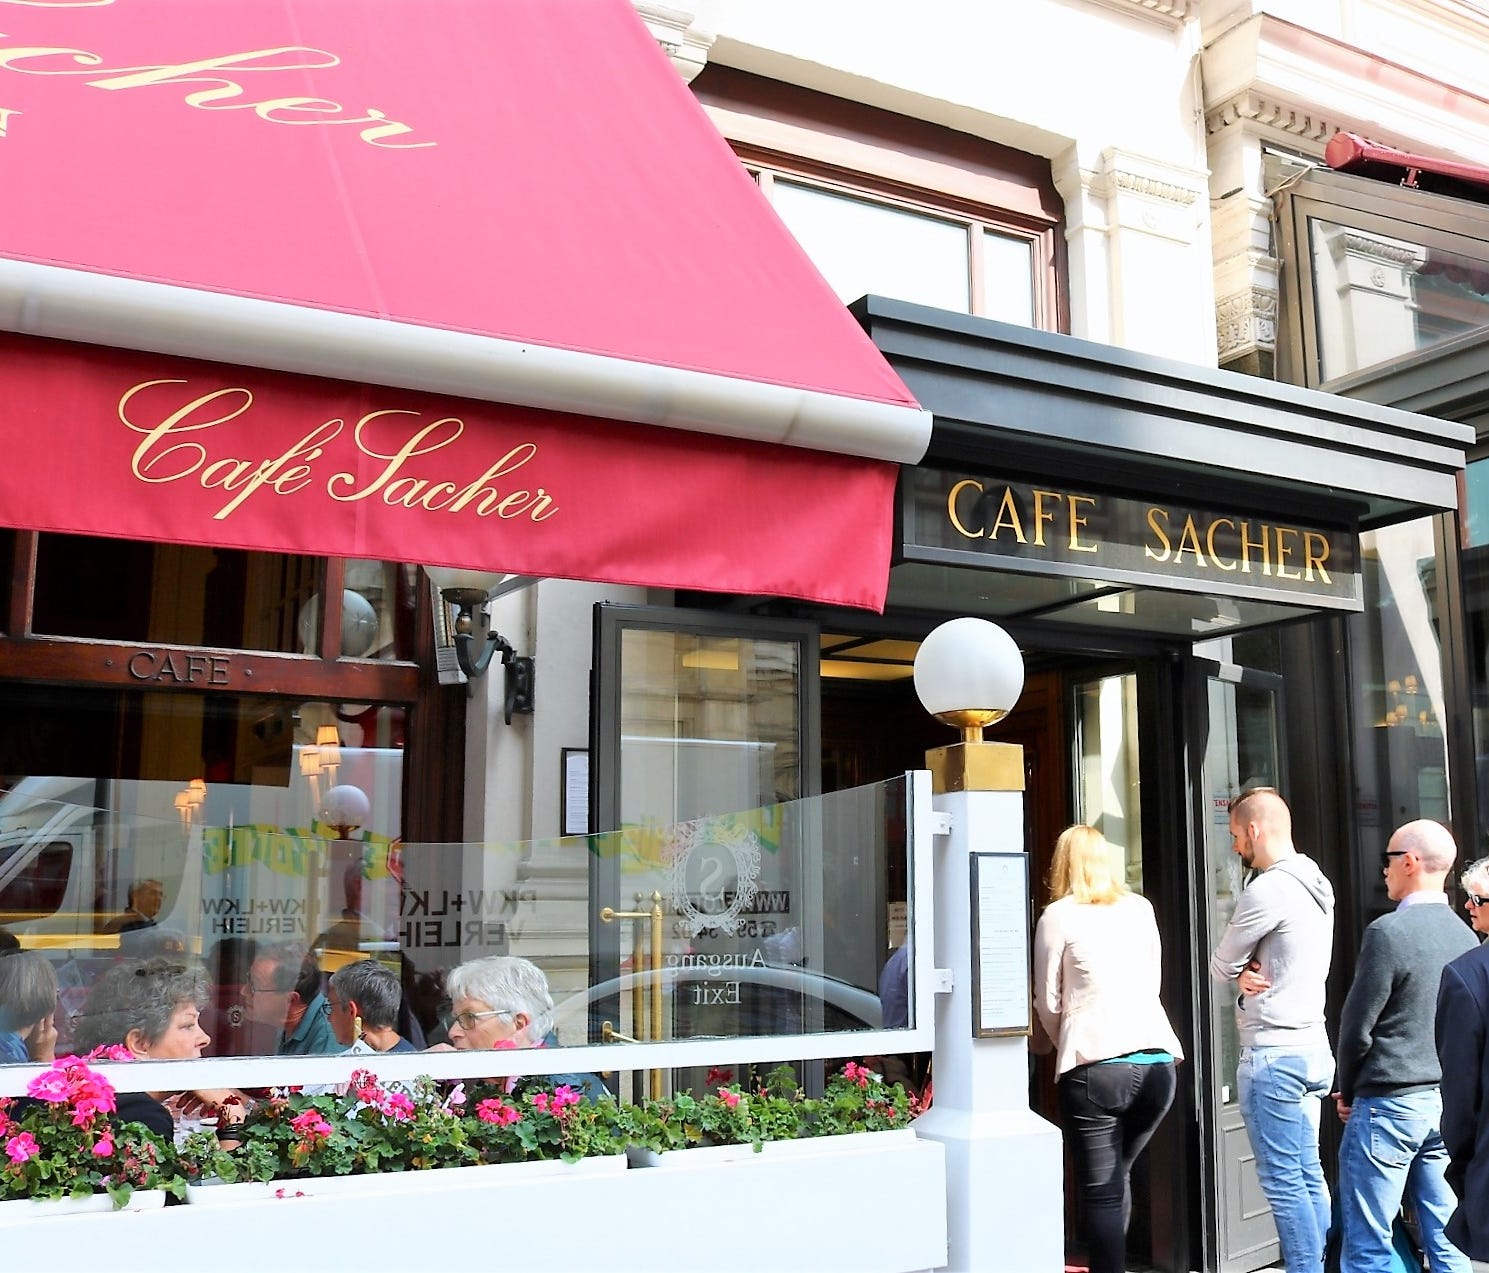 Café Sacher is located streetside at the hotel of the same name. It's an elegant but crowded destination open daily from 8 a.m. to midnight. Beware of long lines.